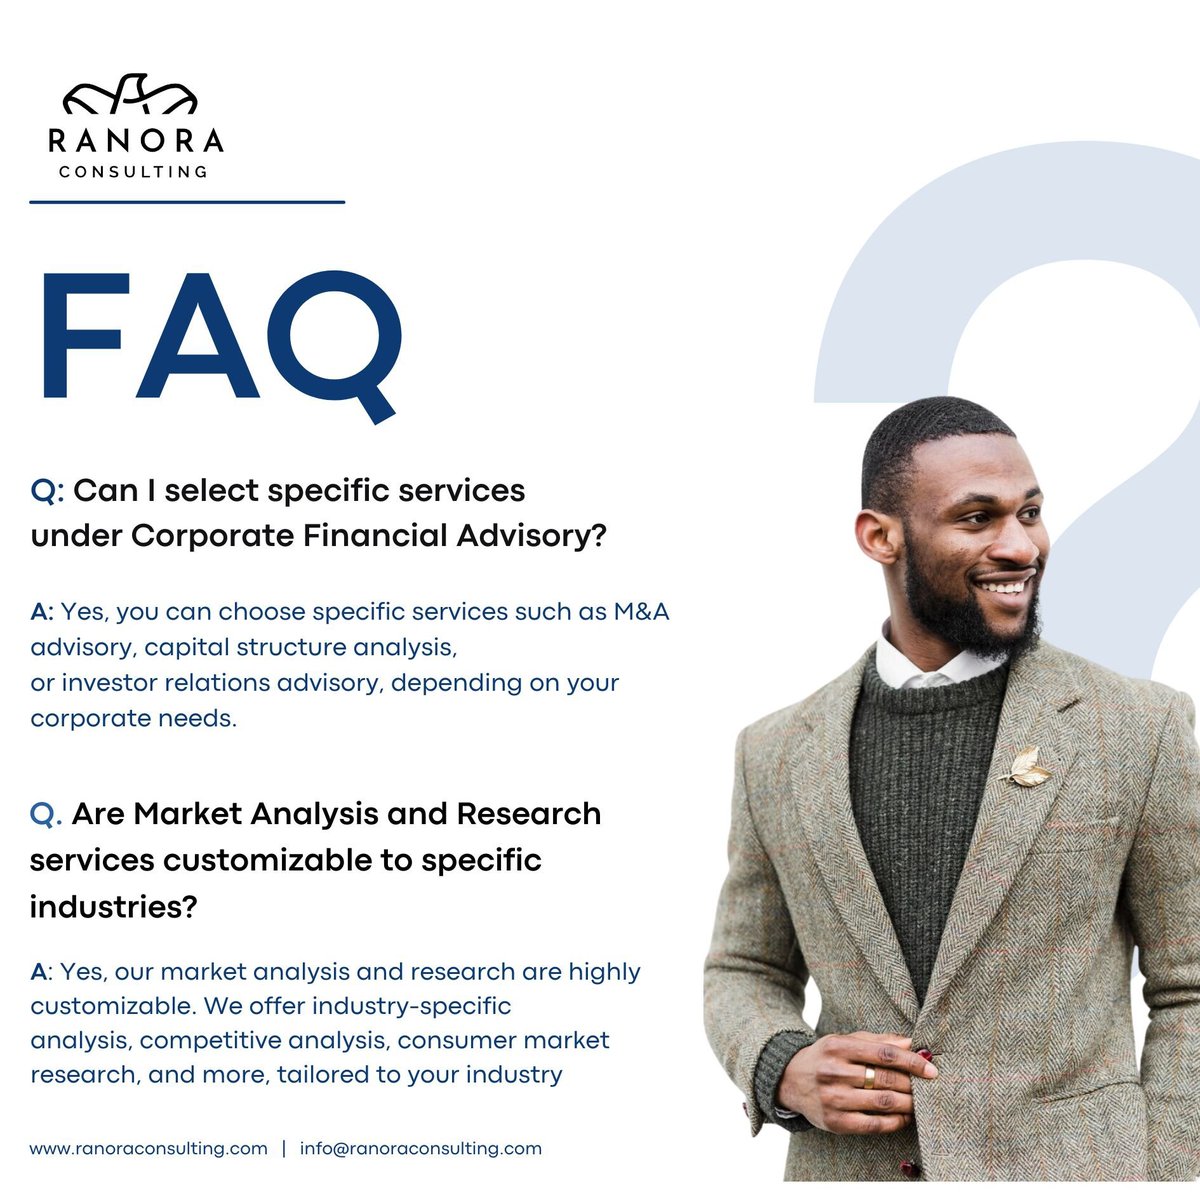 Got questions? dive into some of our FAQs for the answers you'll need.

Drop comments if you have more questions and trust we would respond
#FAQs #Getinformed 📚📚 ✨